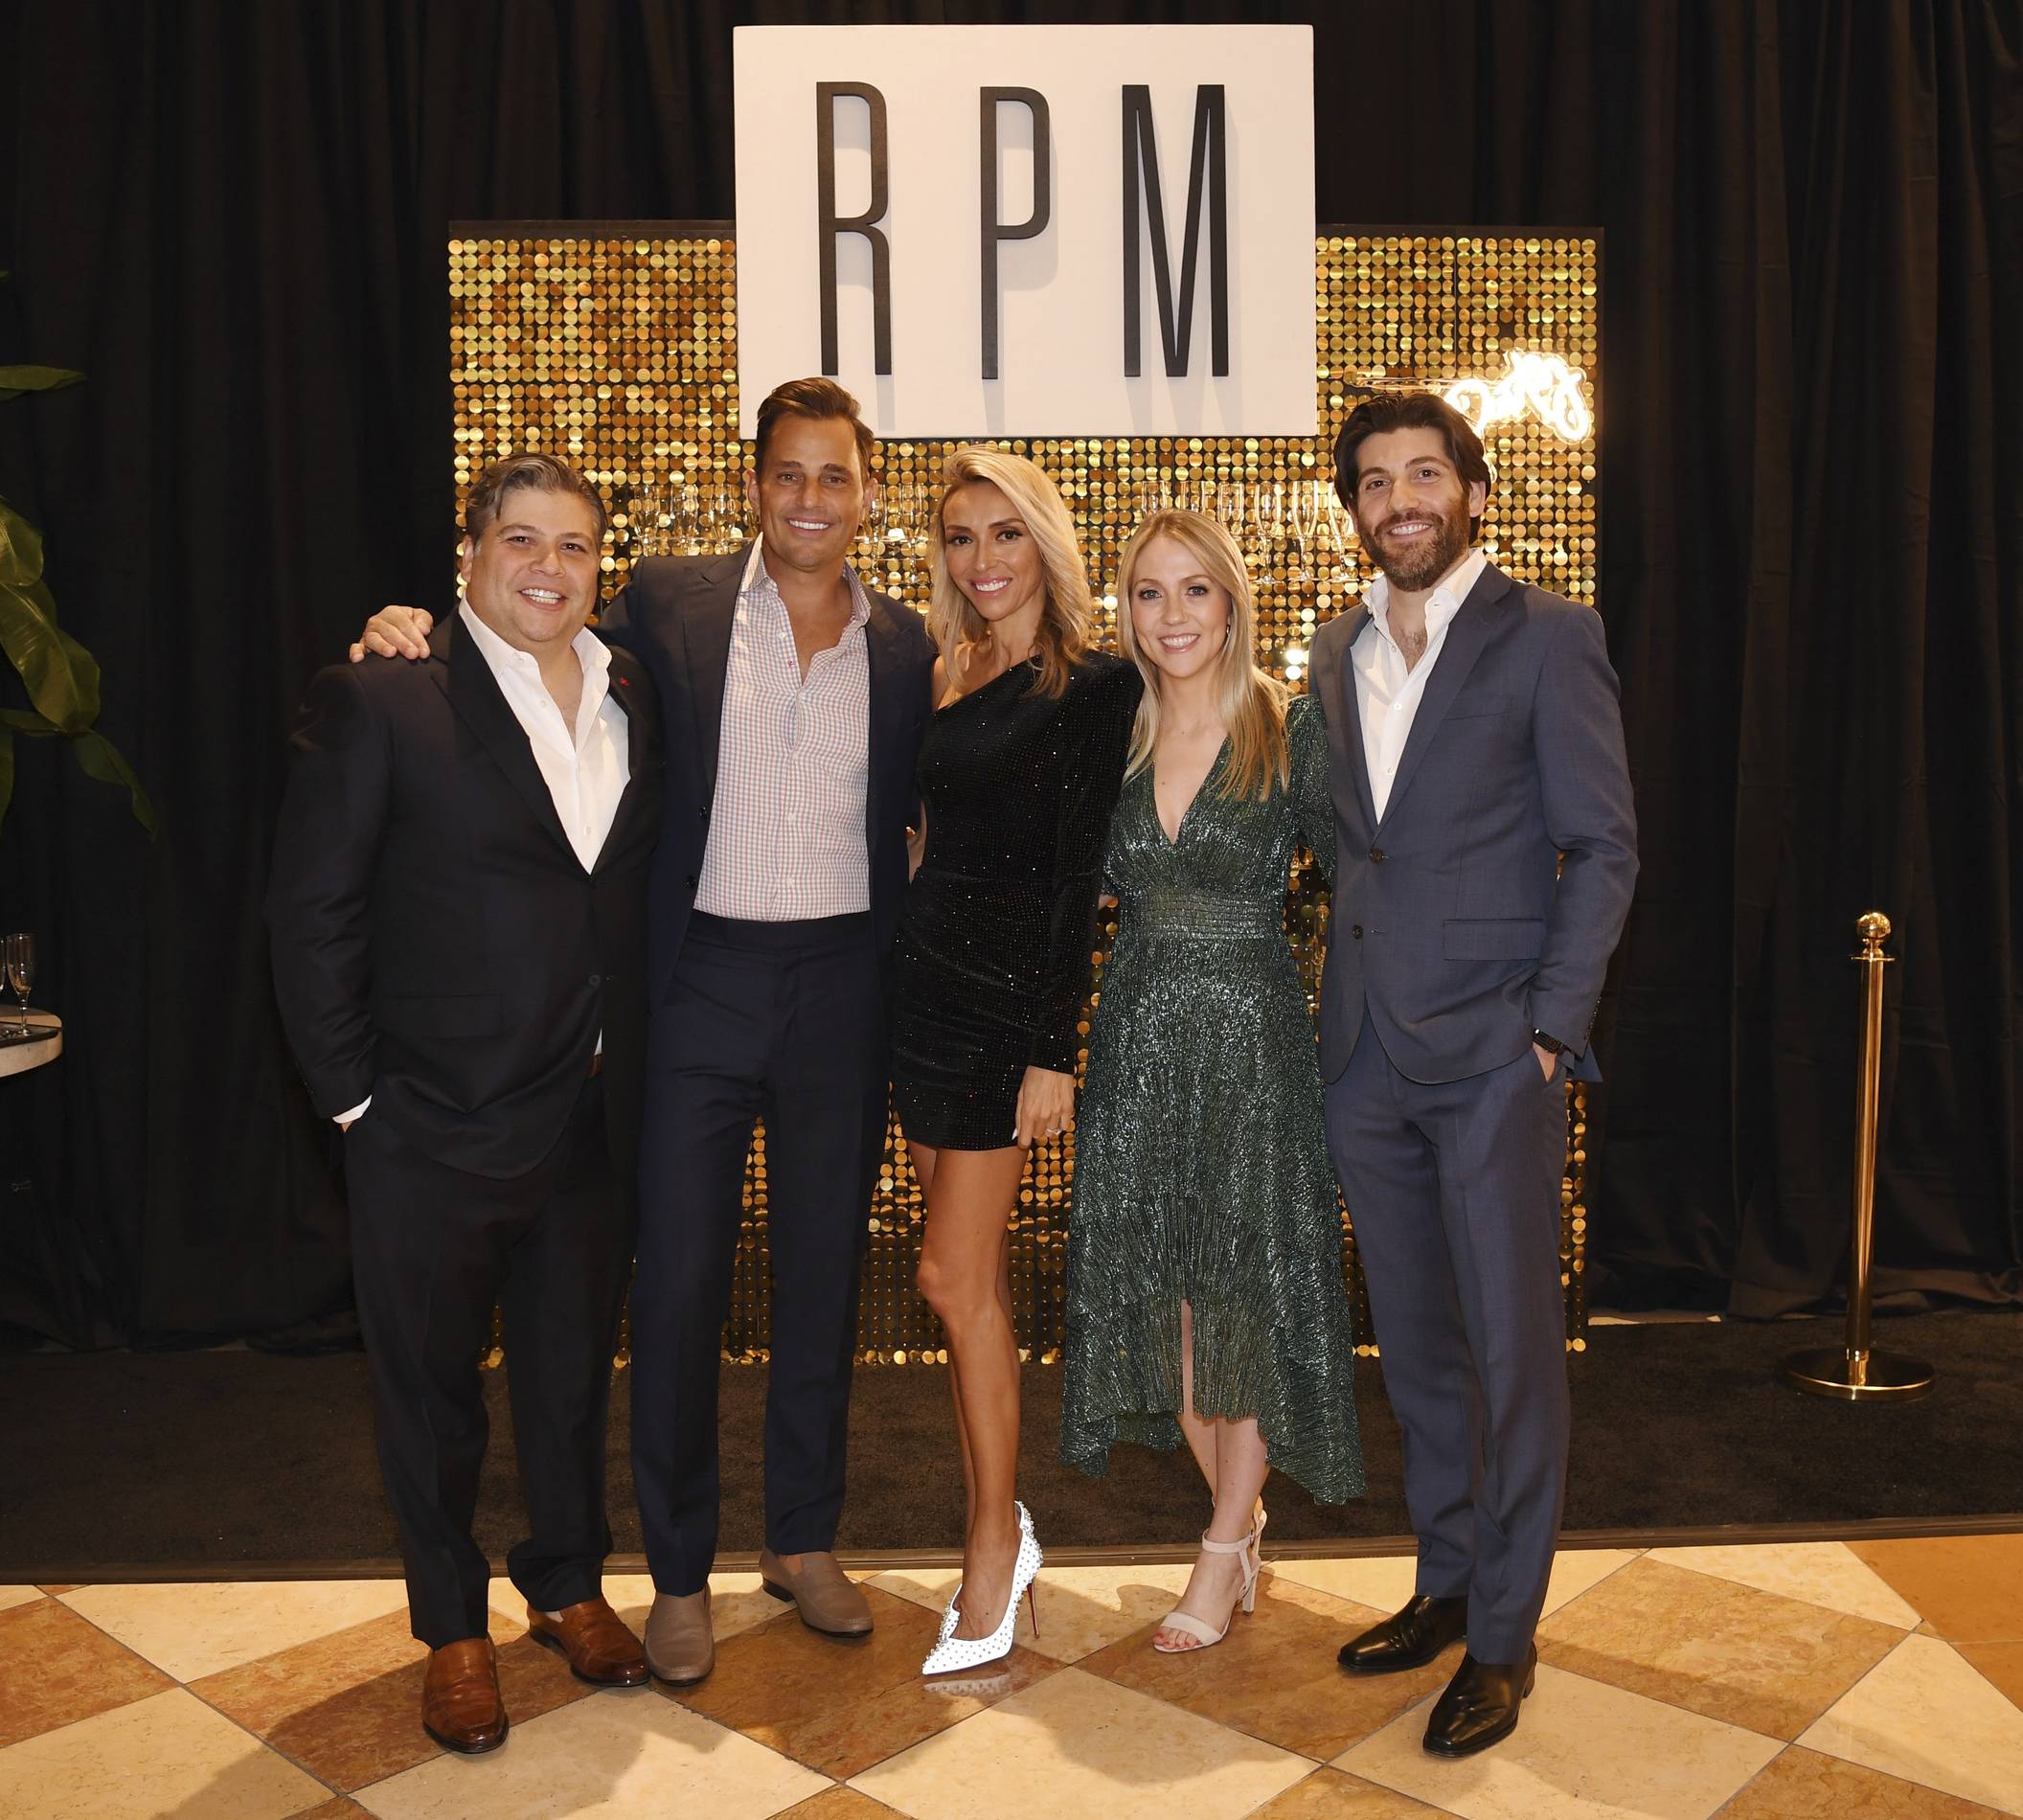 rpm-italian-group-GettyImages.jpg